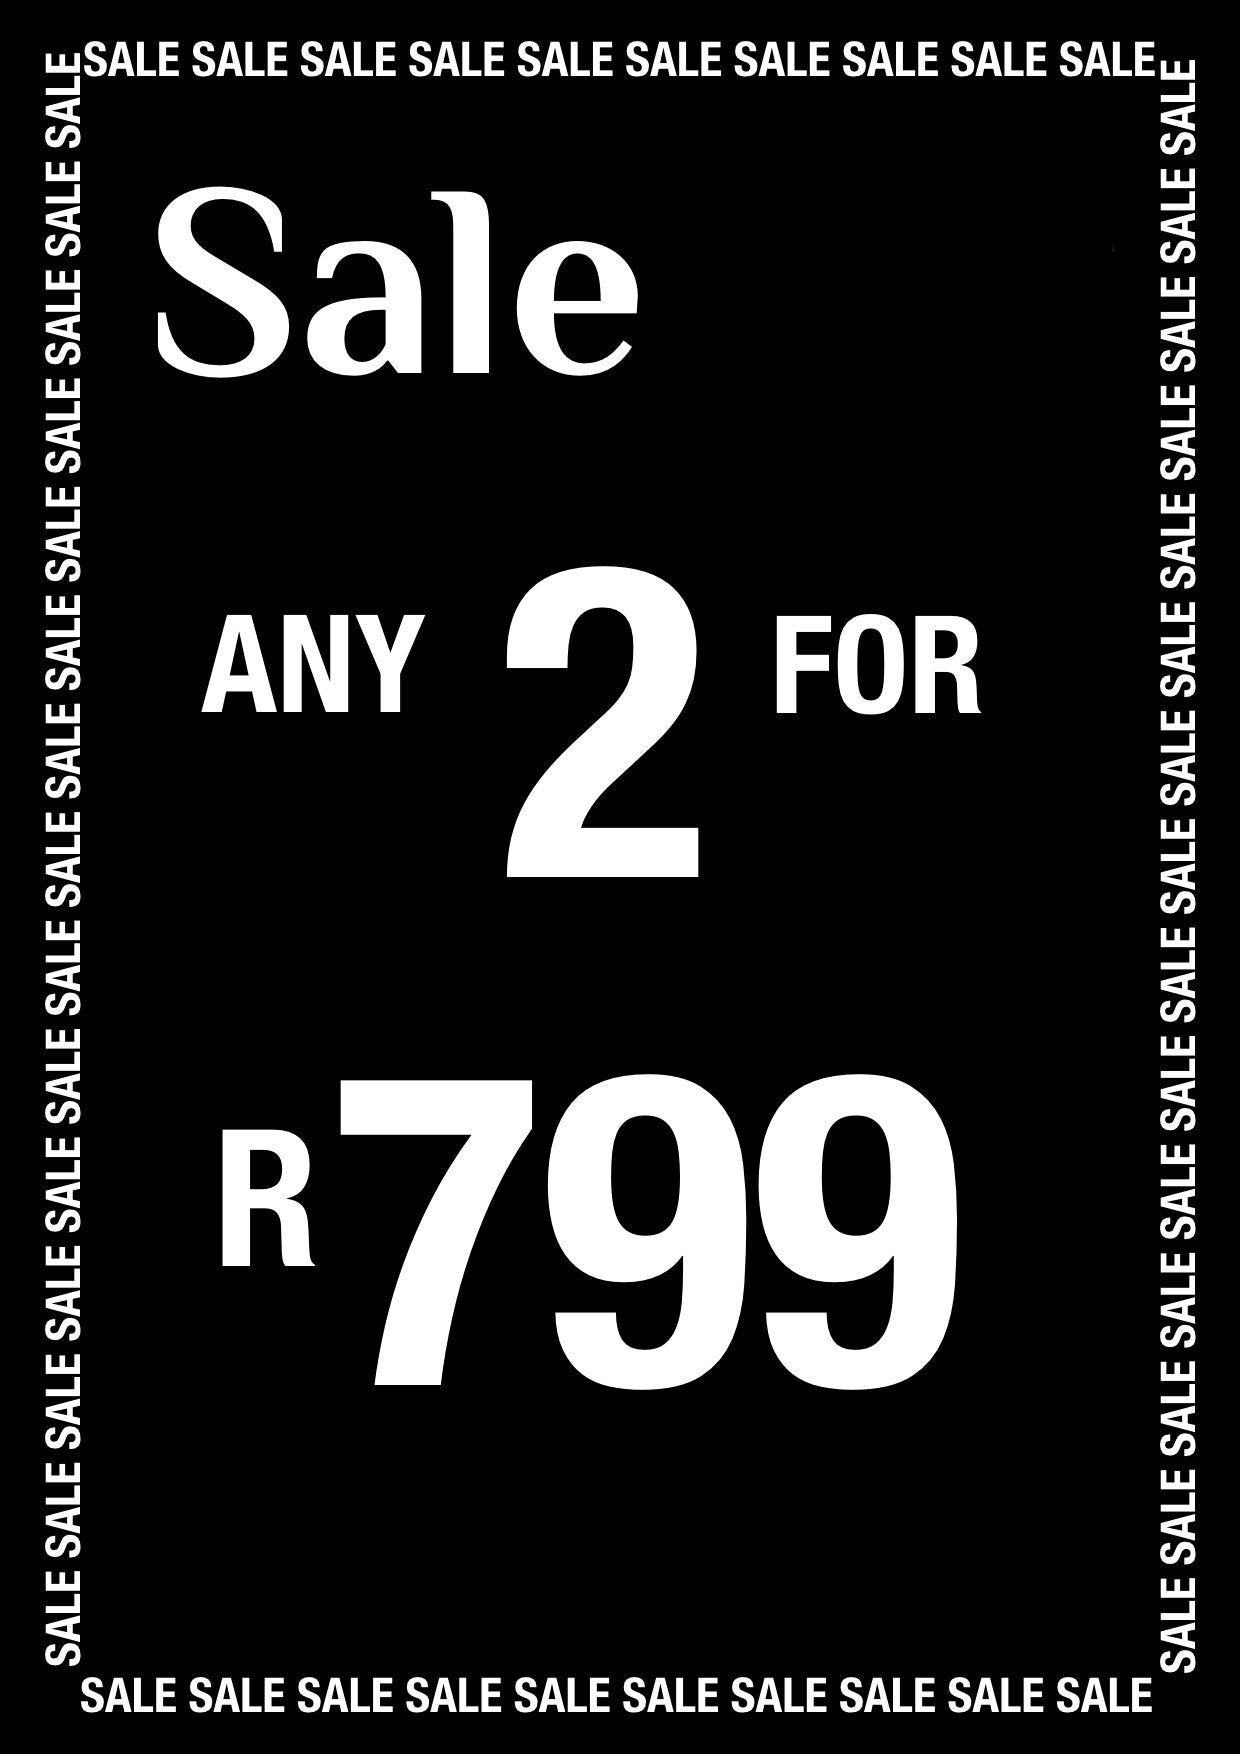 ANY 2 FOR R799